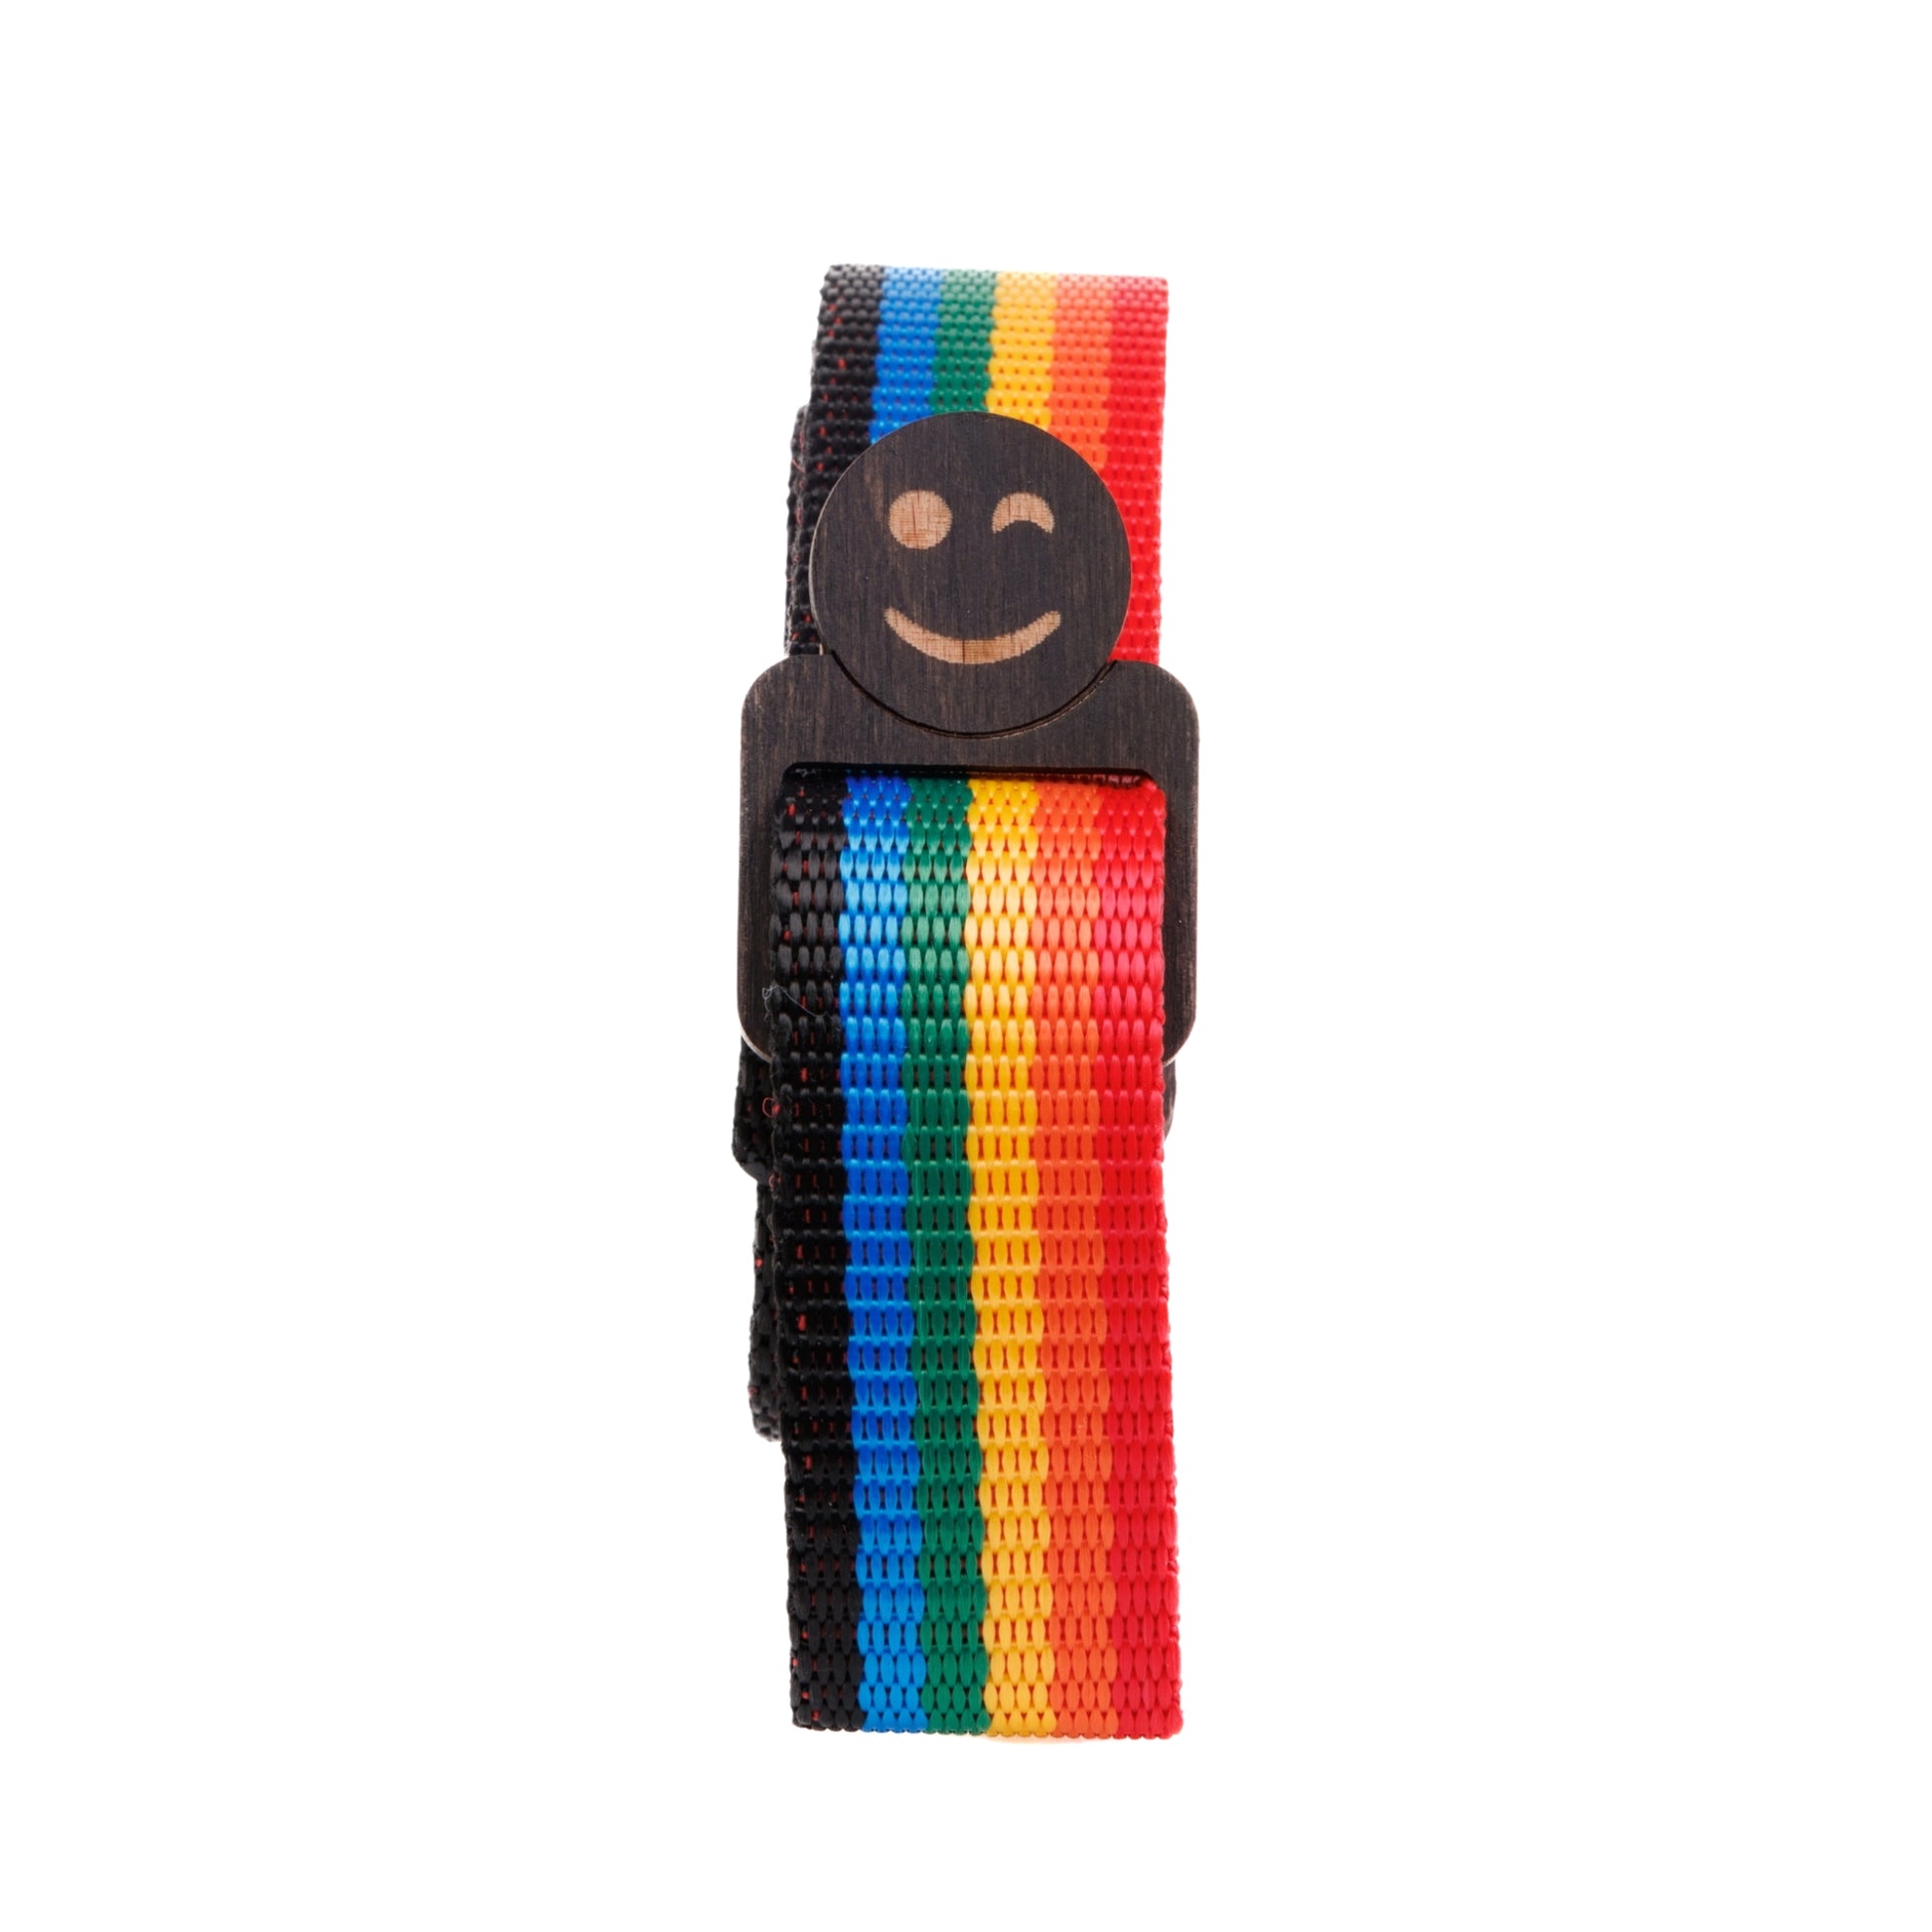 Packed Rainbow fabric neckstrap designed for Jollylook cameras, featuring a sturdy natural wood lock for securely carrying the camera.